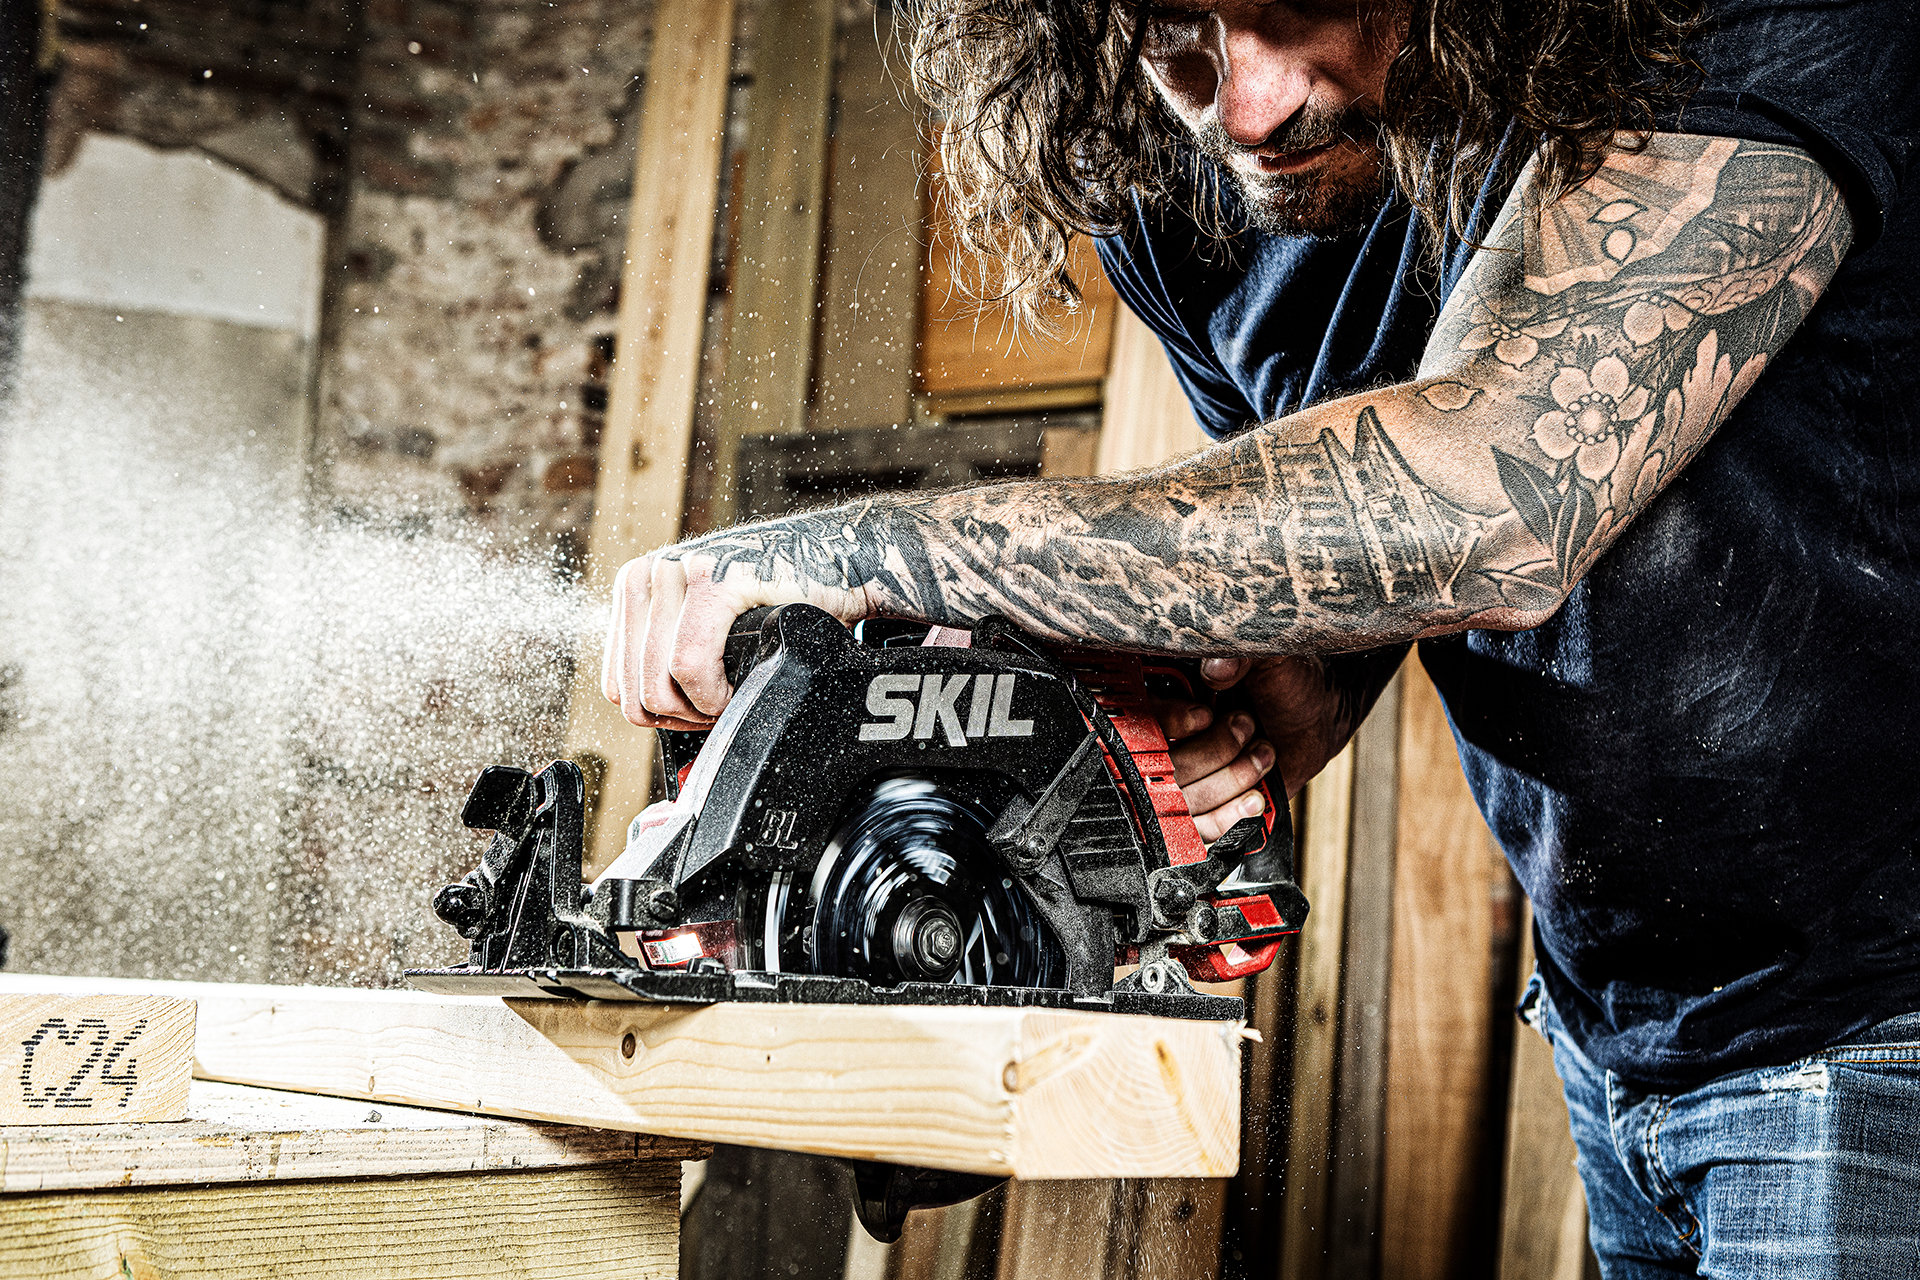 commercial photography shot on location for skil power tools